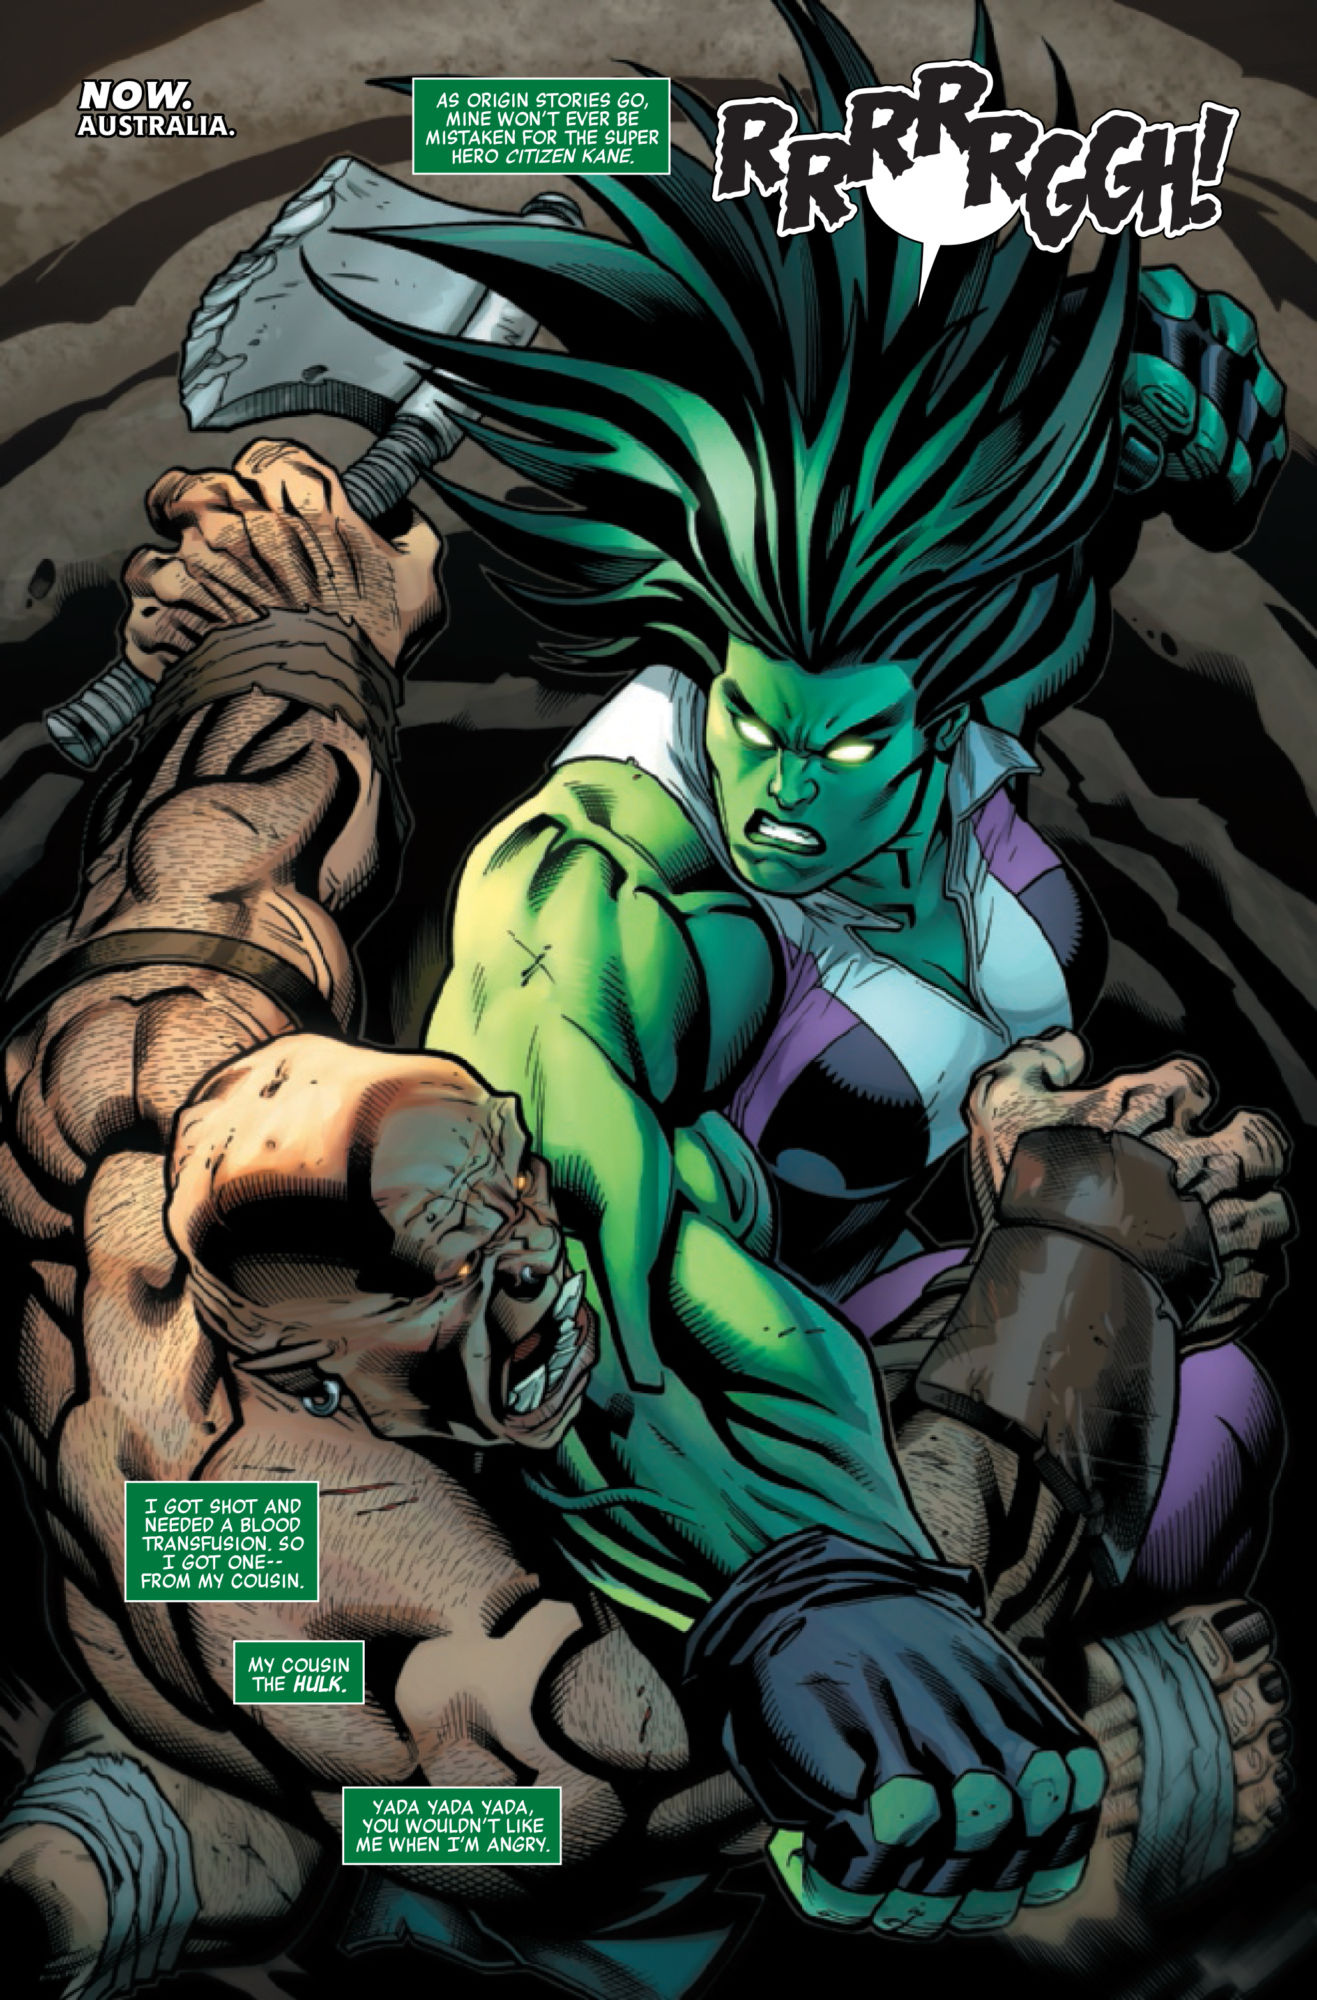 No fun: Discussing She-Hulk's lackluster portrayal in 'Avengers' #20 • AIPT